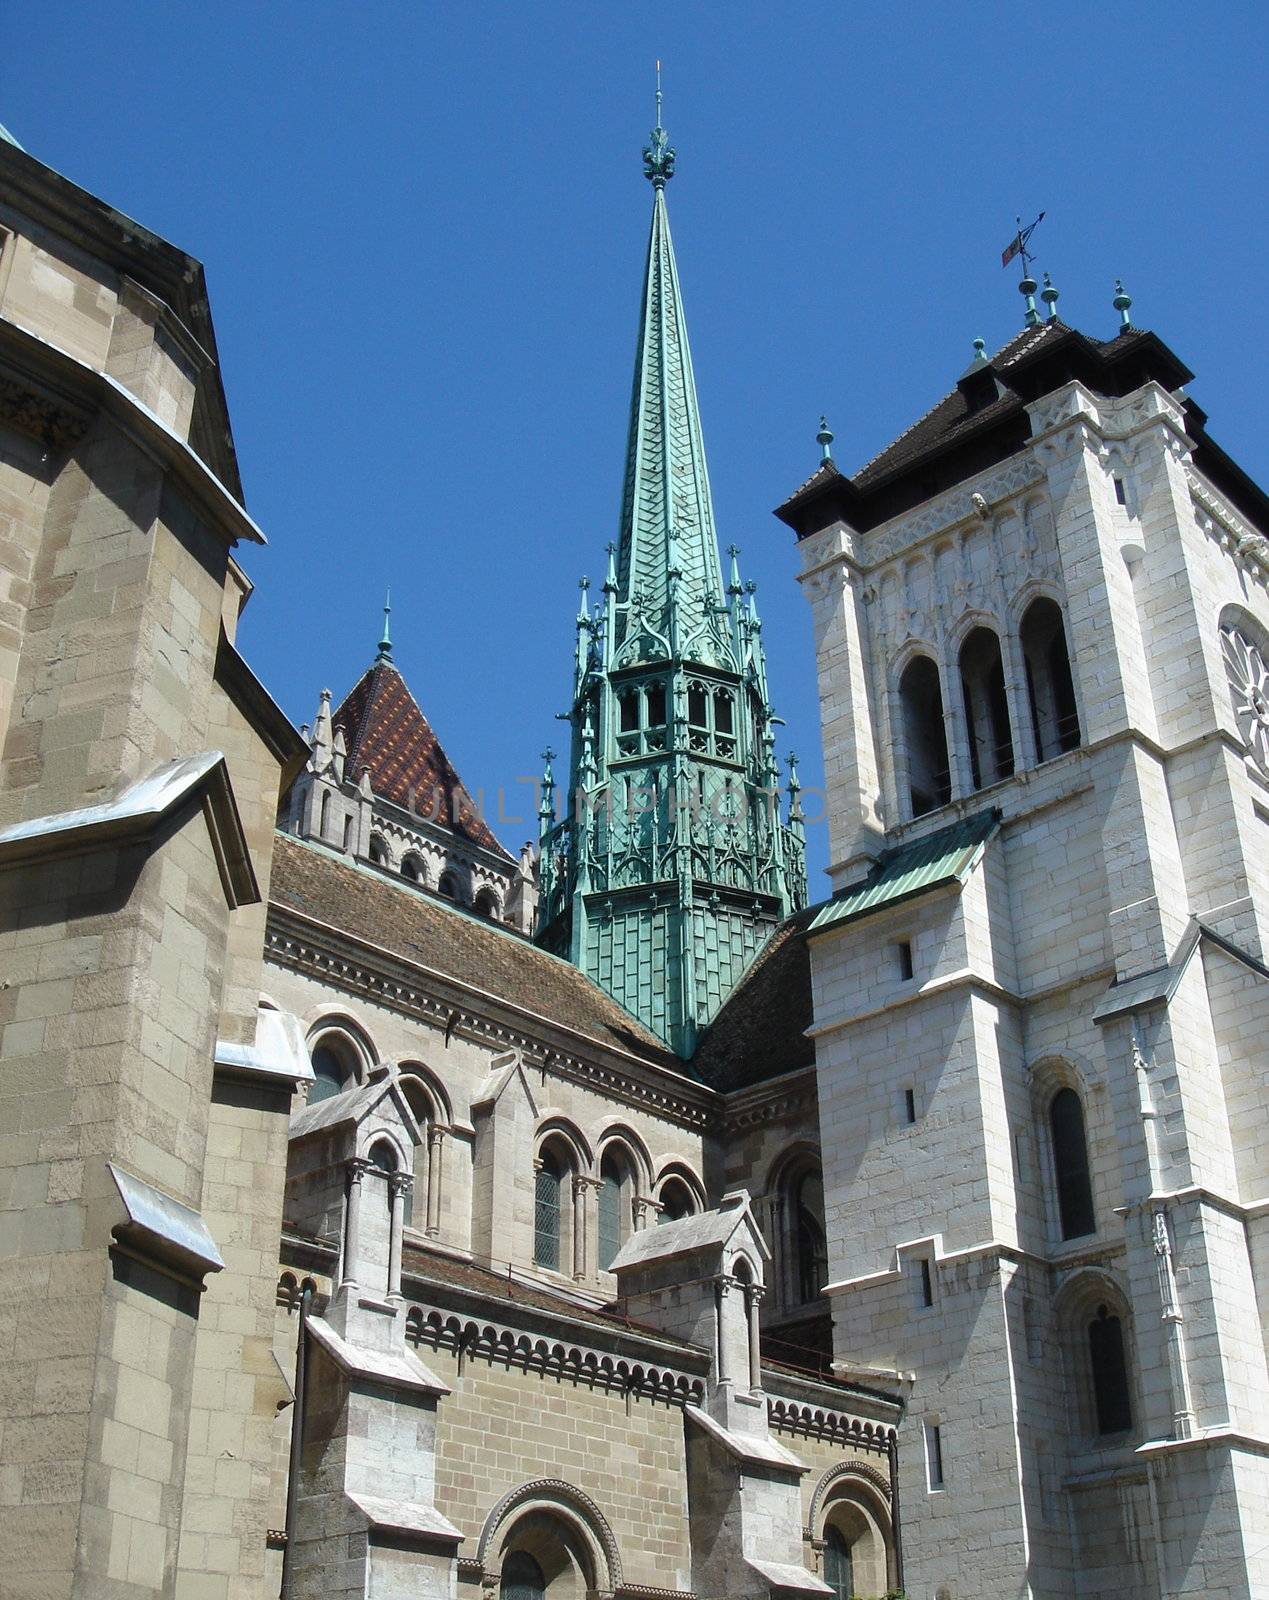 Green bell tower of a cathedral surrounded by other old buildings with deep blue sky